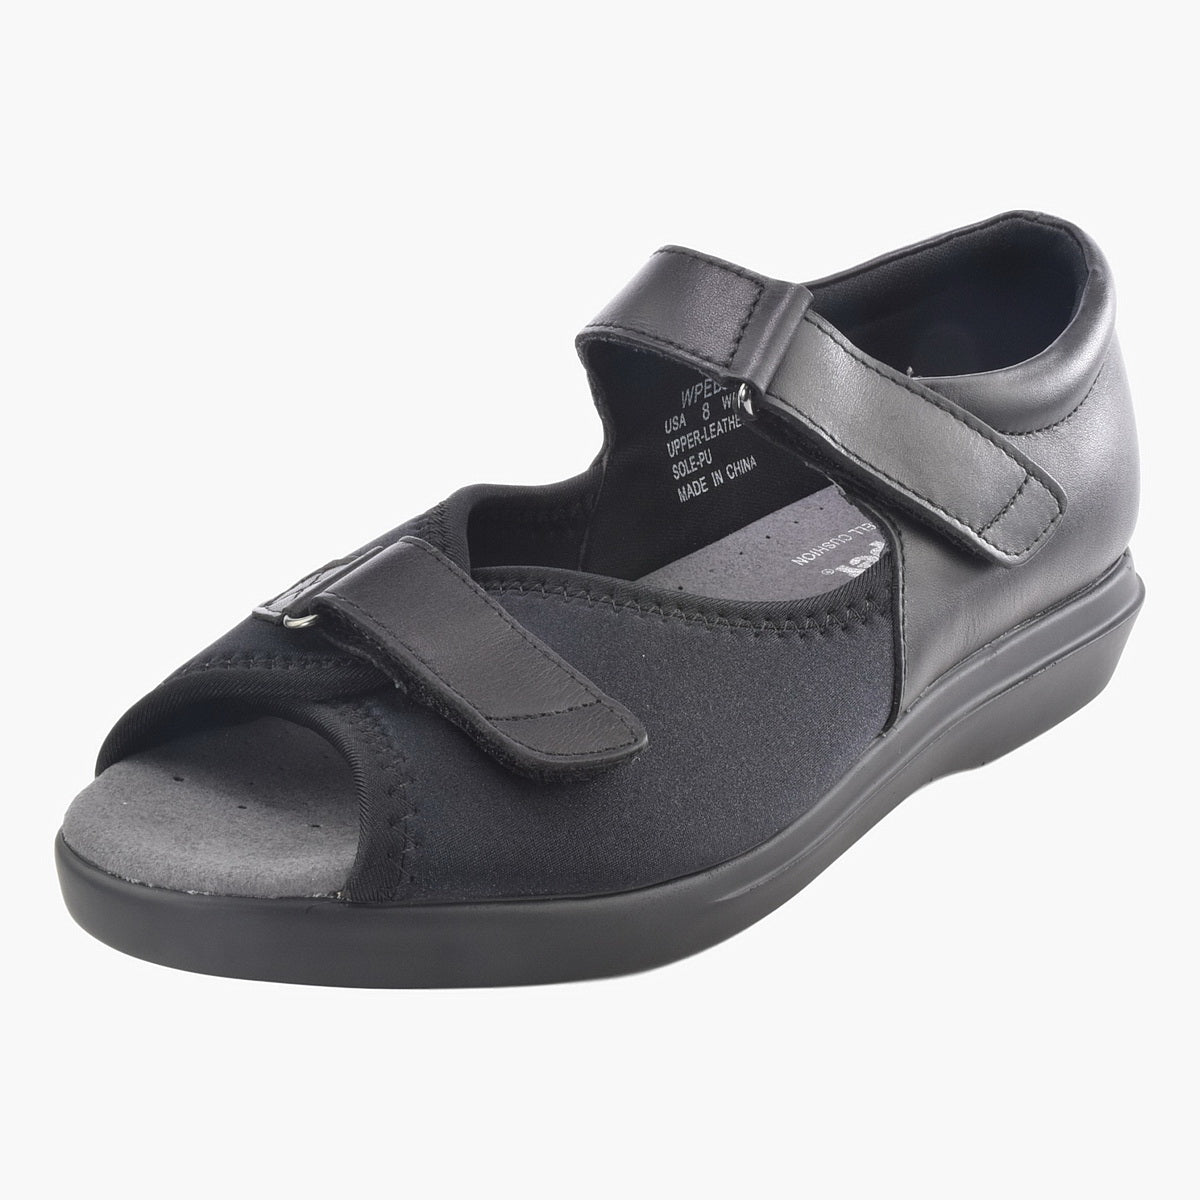 Propet Ped Walker 6 (MGF) – Just Comfort Shoes